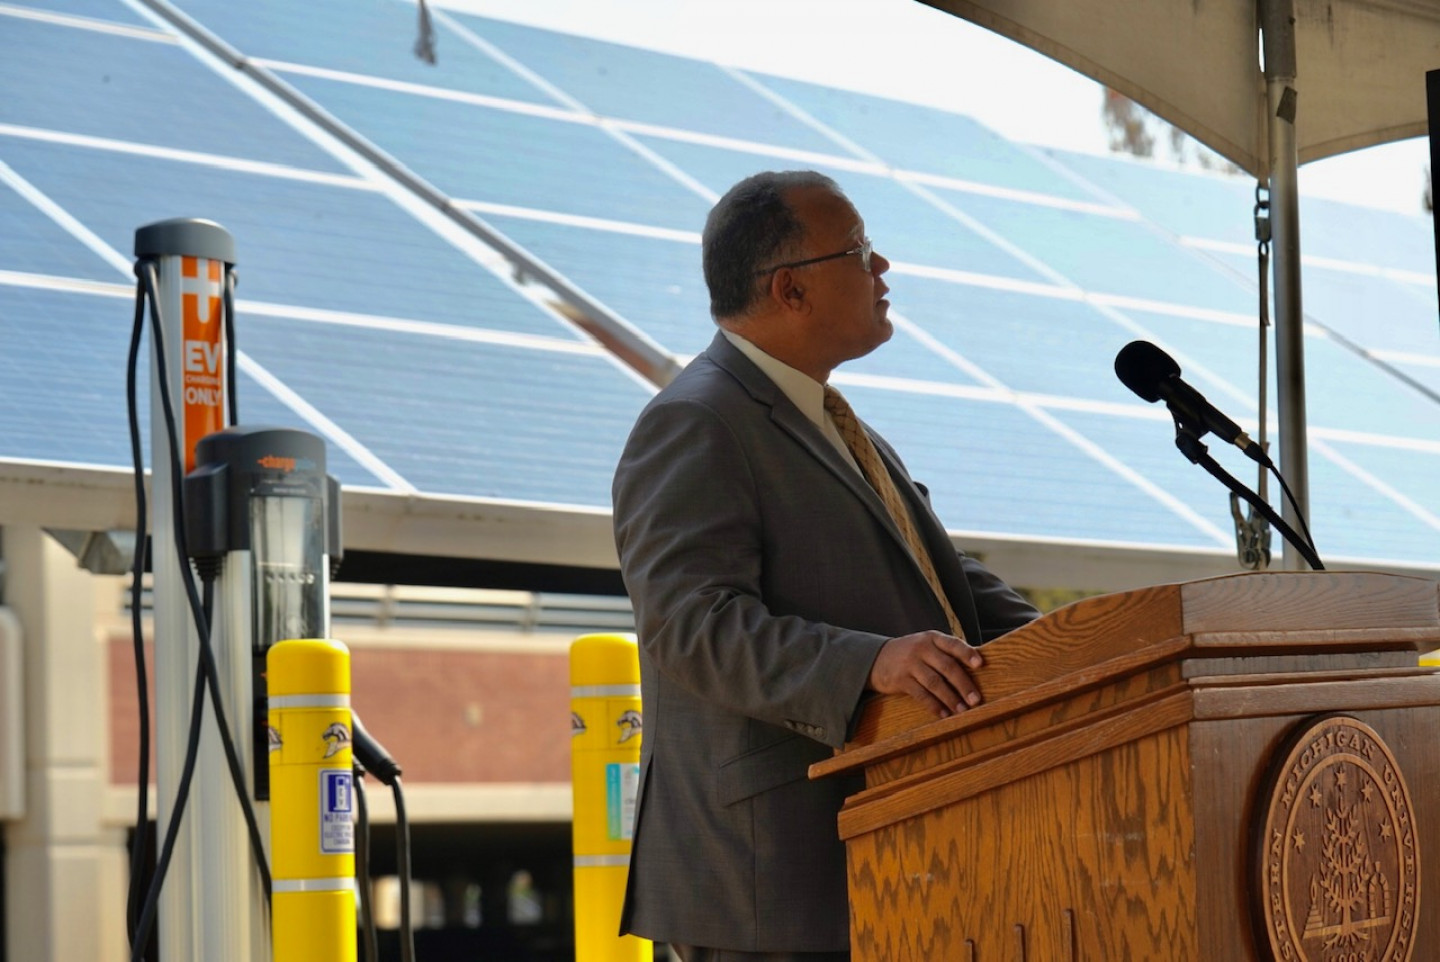 Edward Montgomery stands at a podium in front of a charging station.